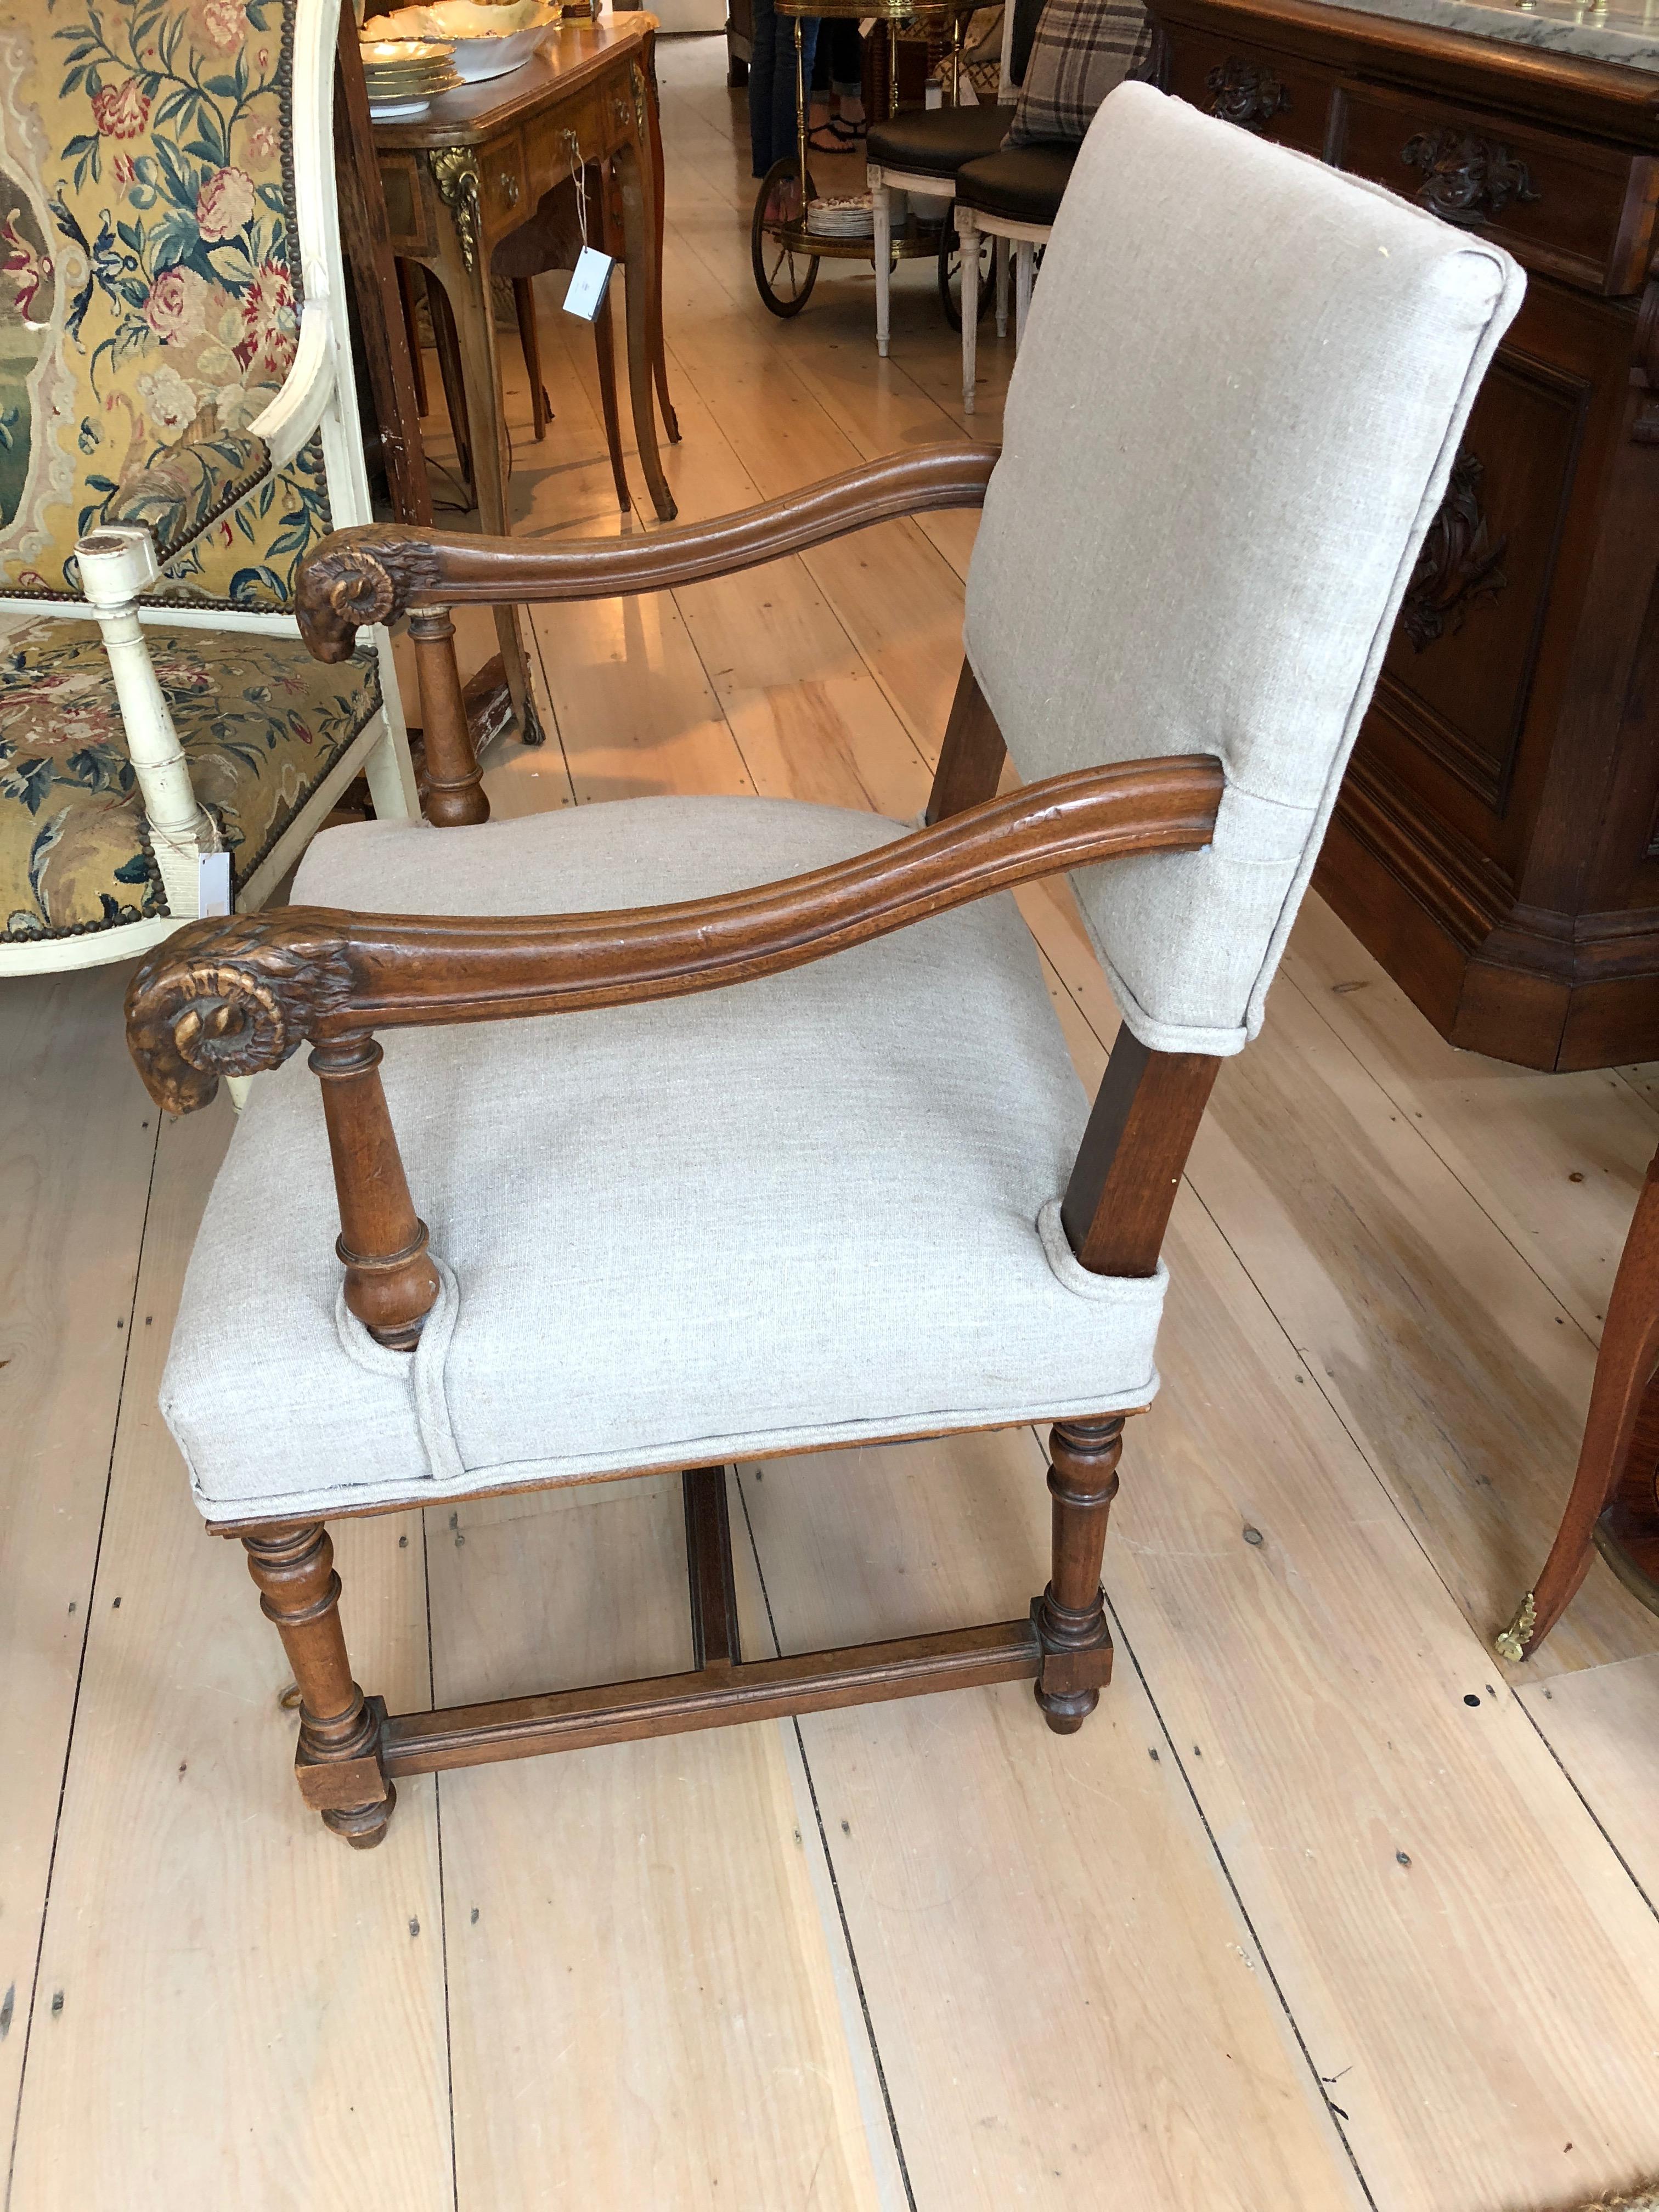 A sophisticated beige linen upholstered antique French armchair having handsome carved walnut arms with fabulous rams heads at the ends, and beautiful stretcher underneath.
Measures: Arm height 25; seat depth 22.